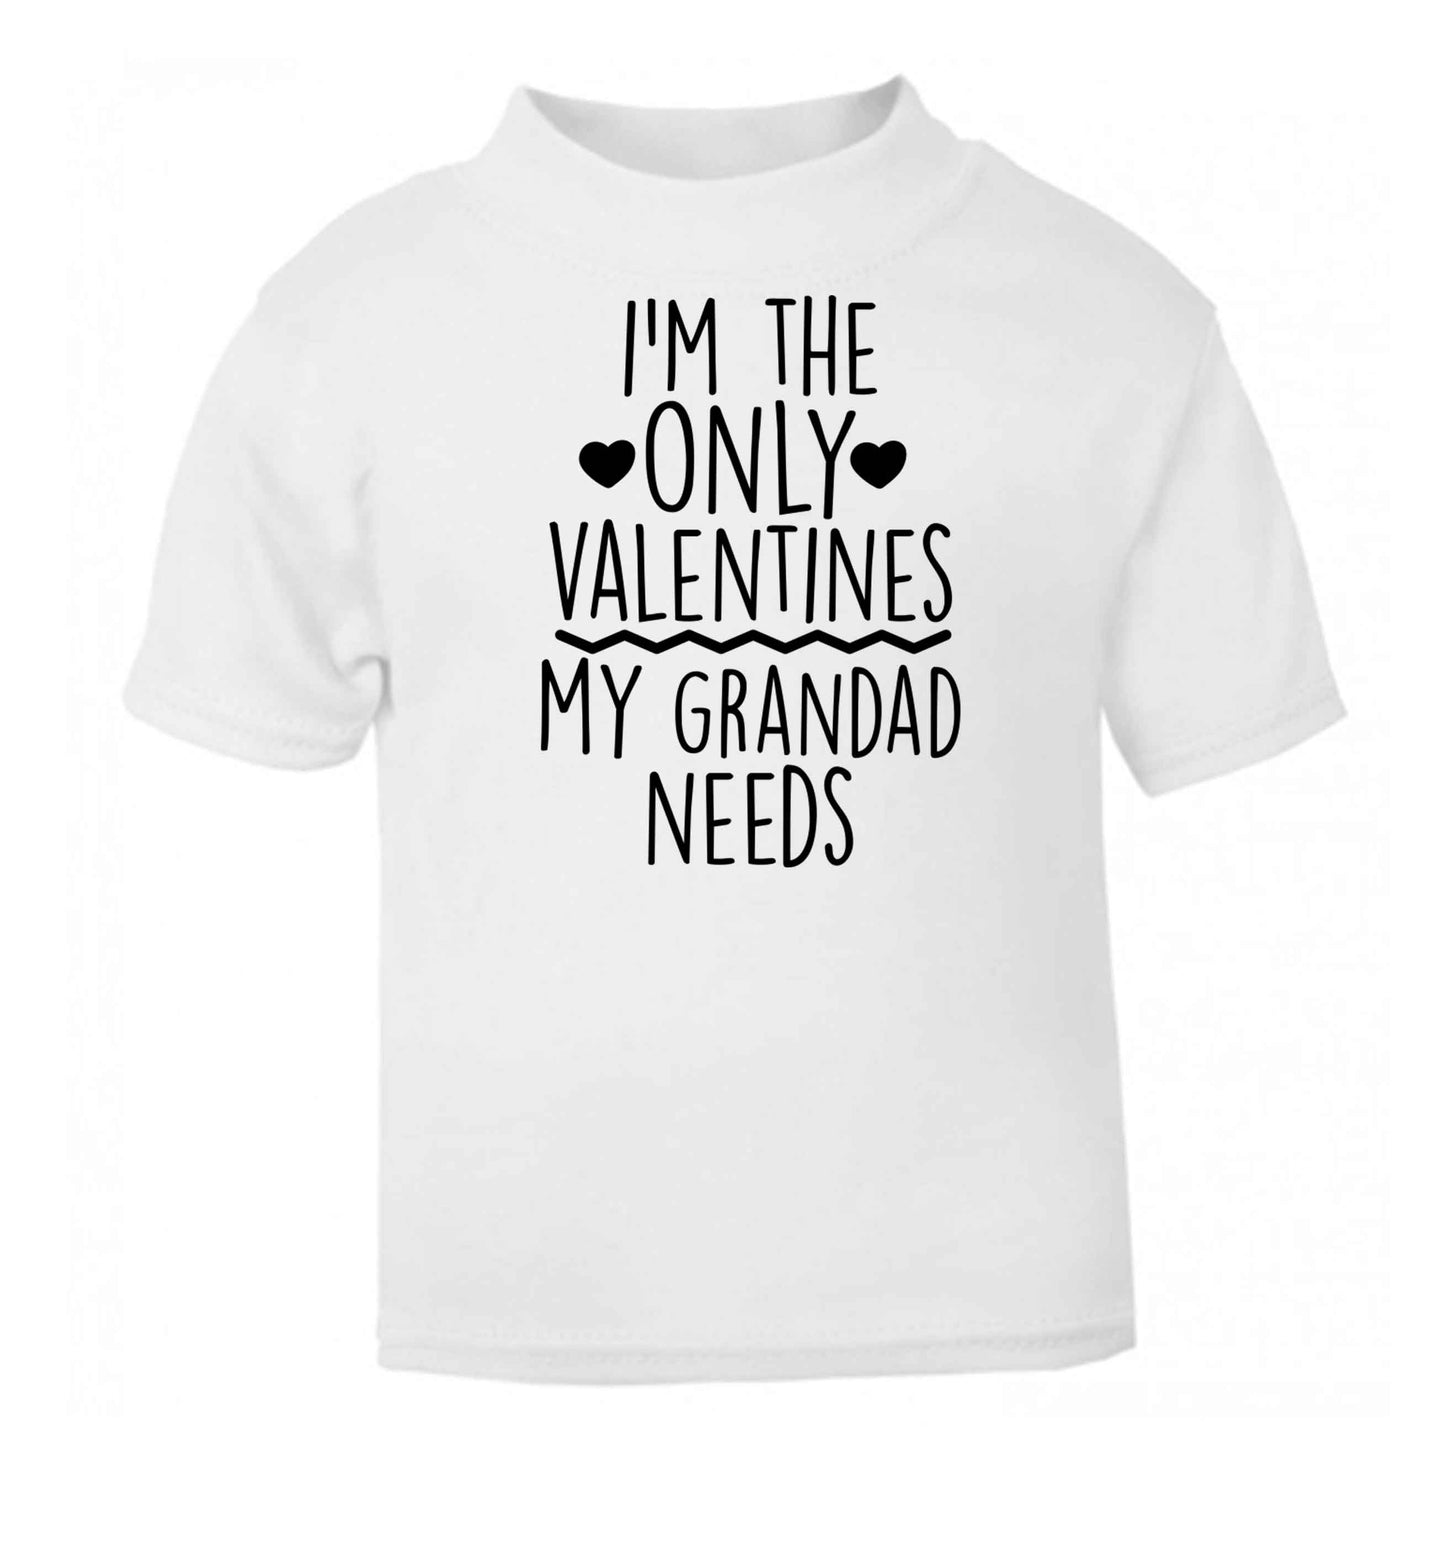 I'm the only valentines my grandad needs white baby toddler Tshirt 2 Years